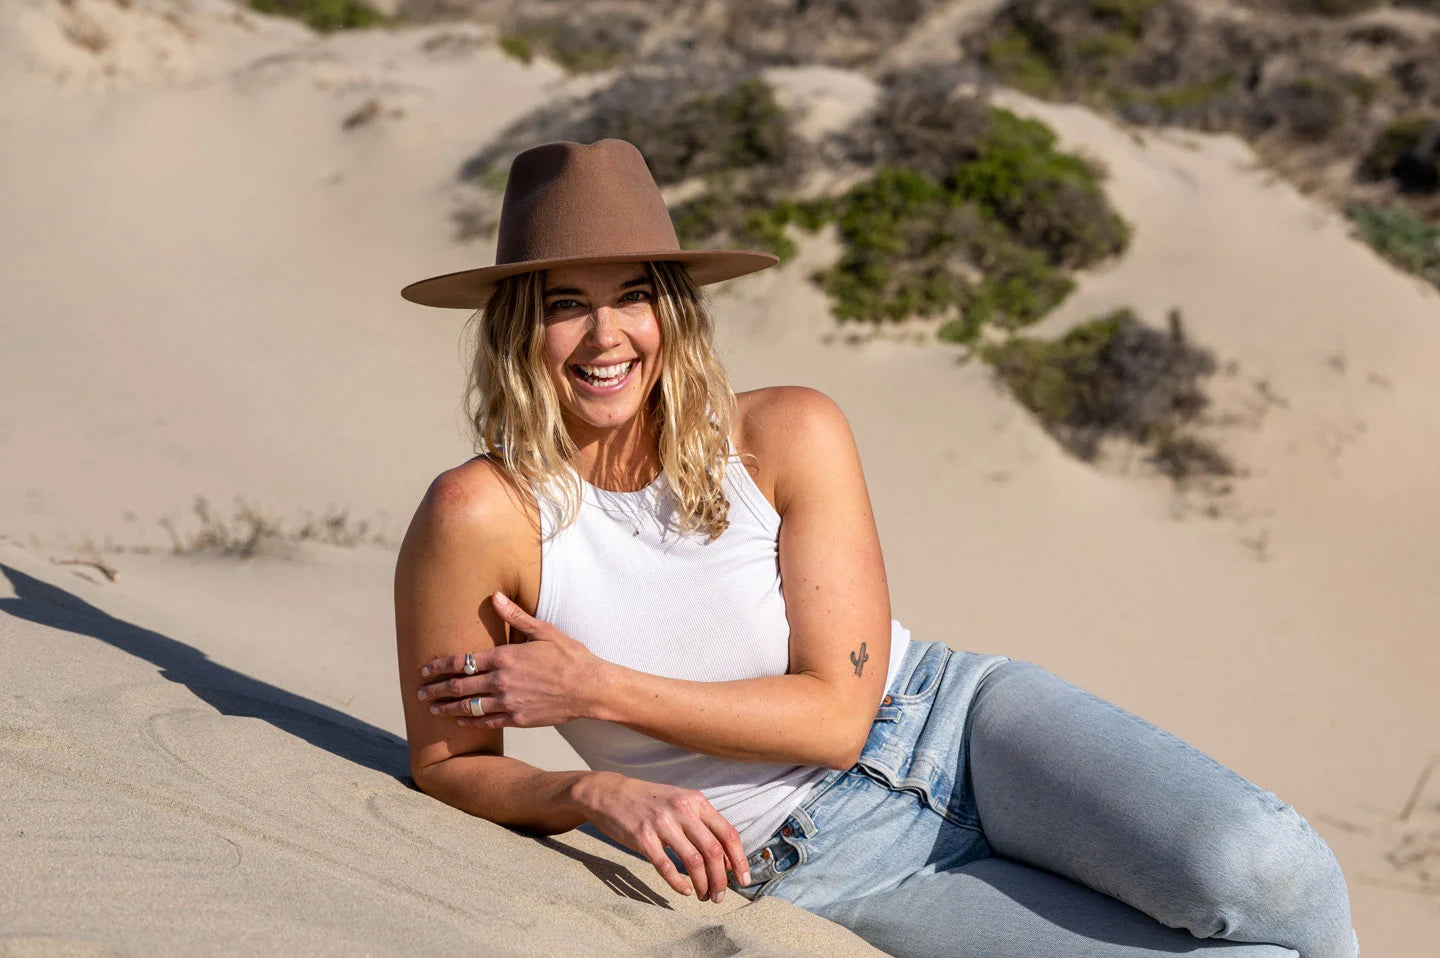 Woman laughing on beach wearing the Rancher womens wide brim hat by American Hat Makers